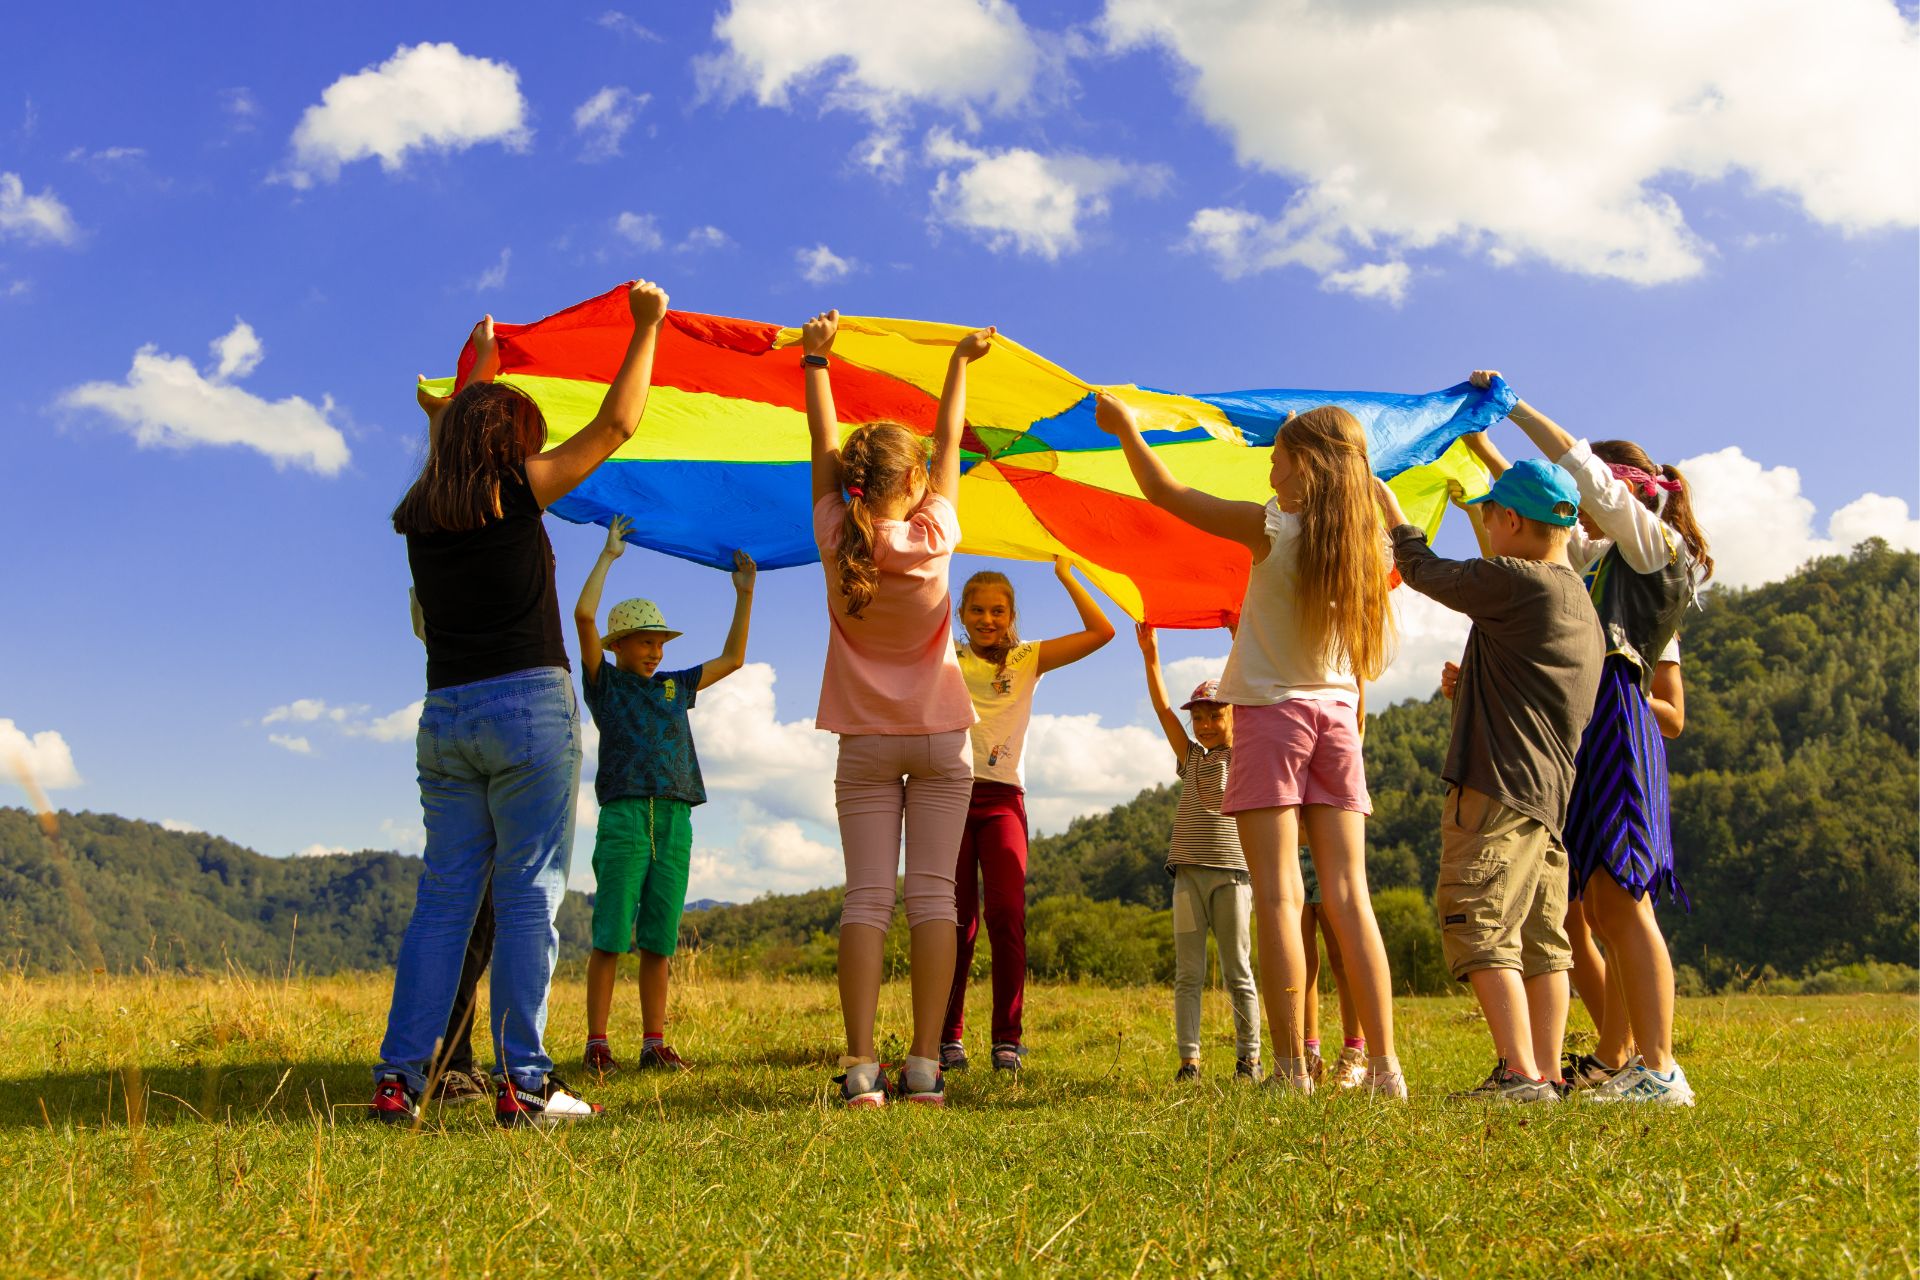 Kids playing with colourful parachute